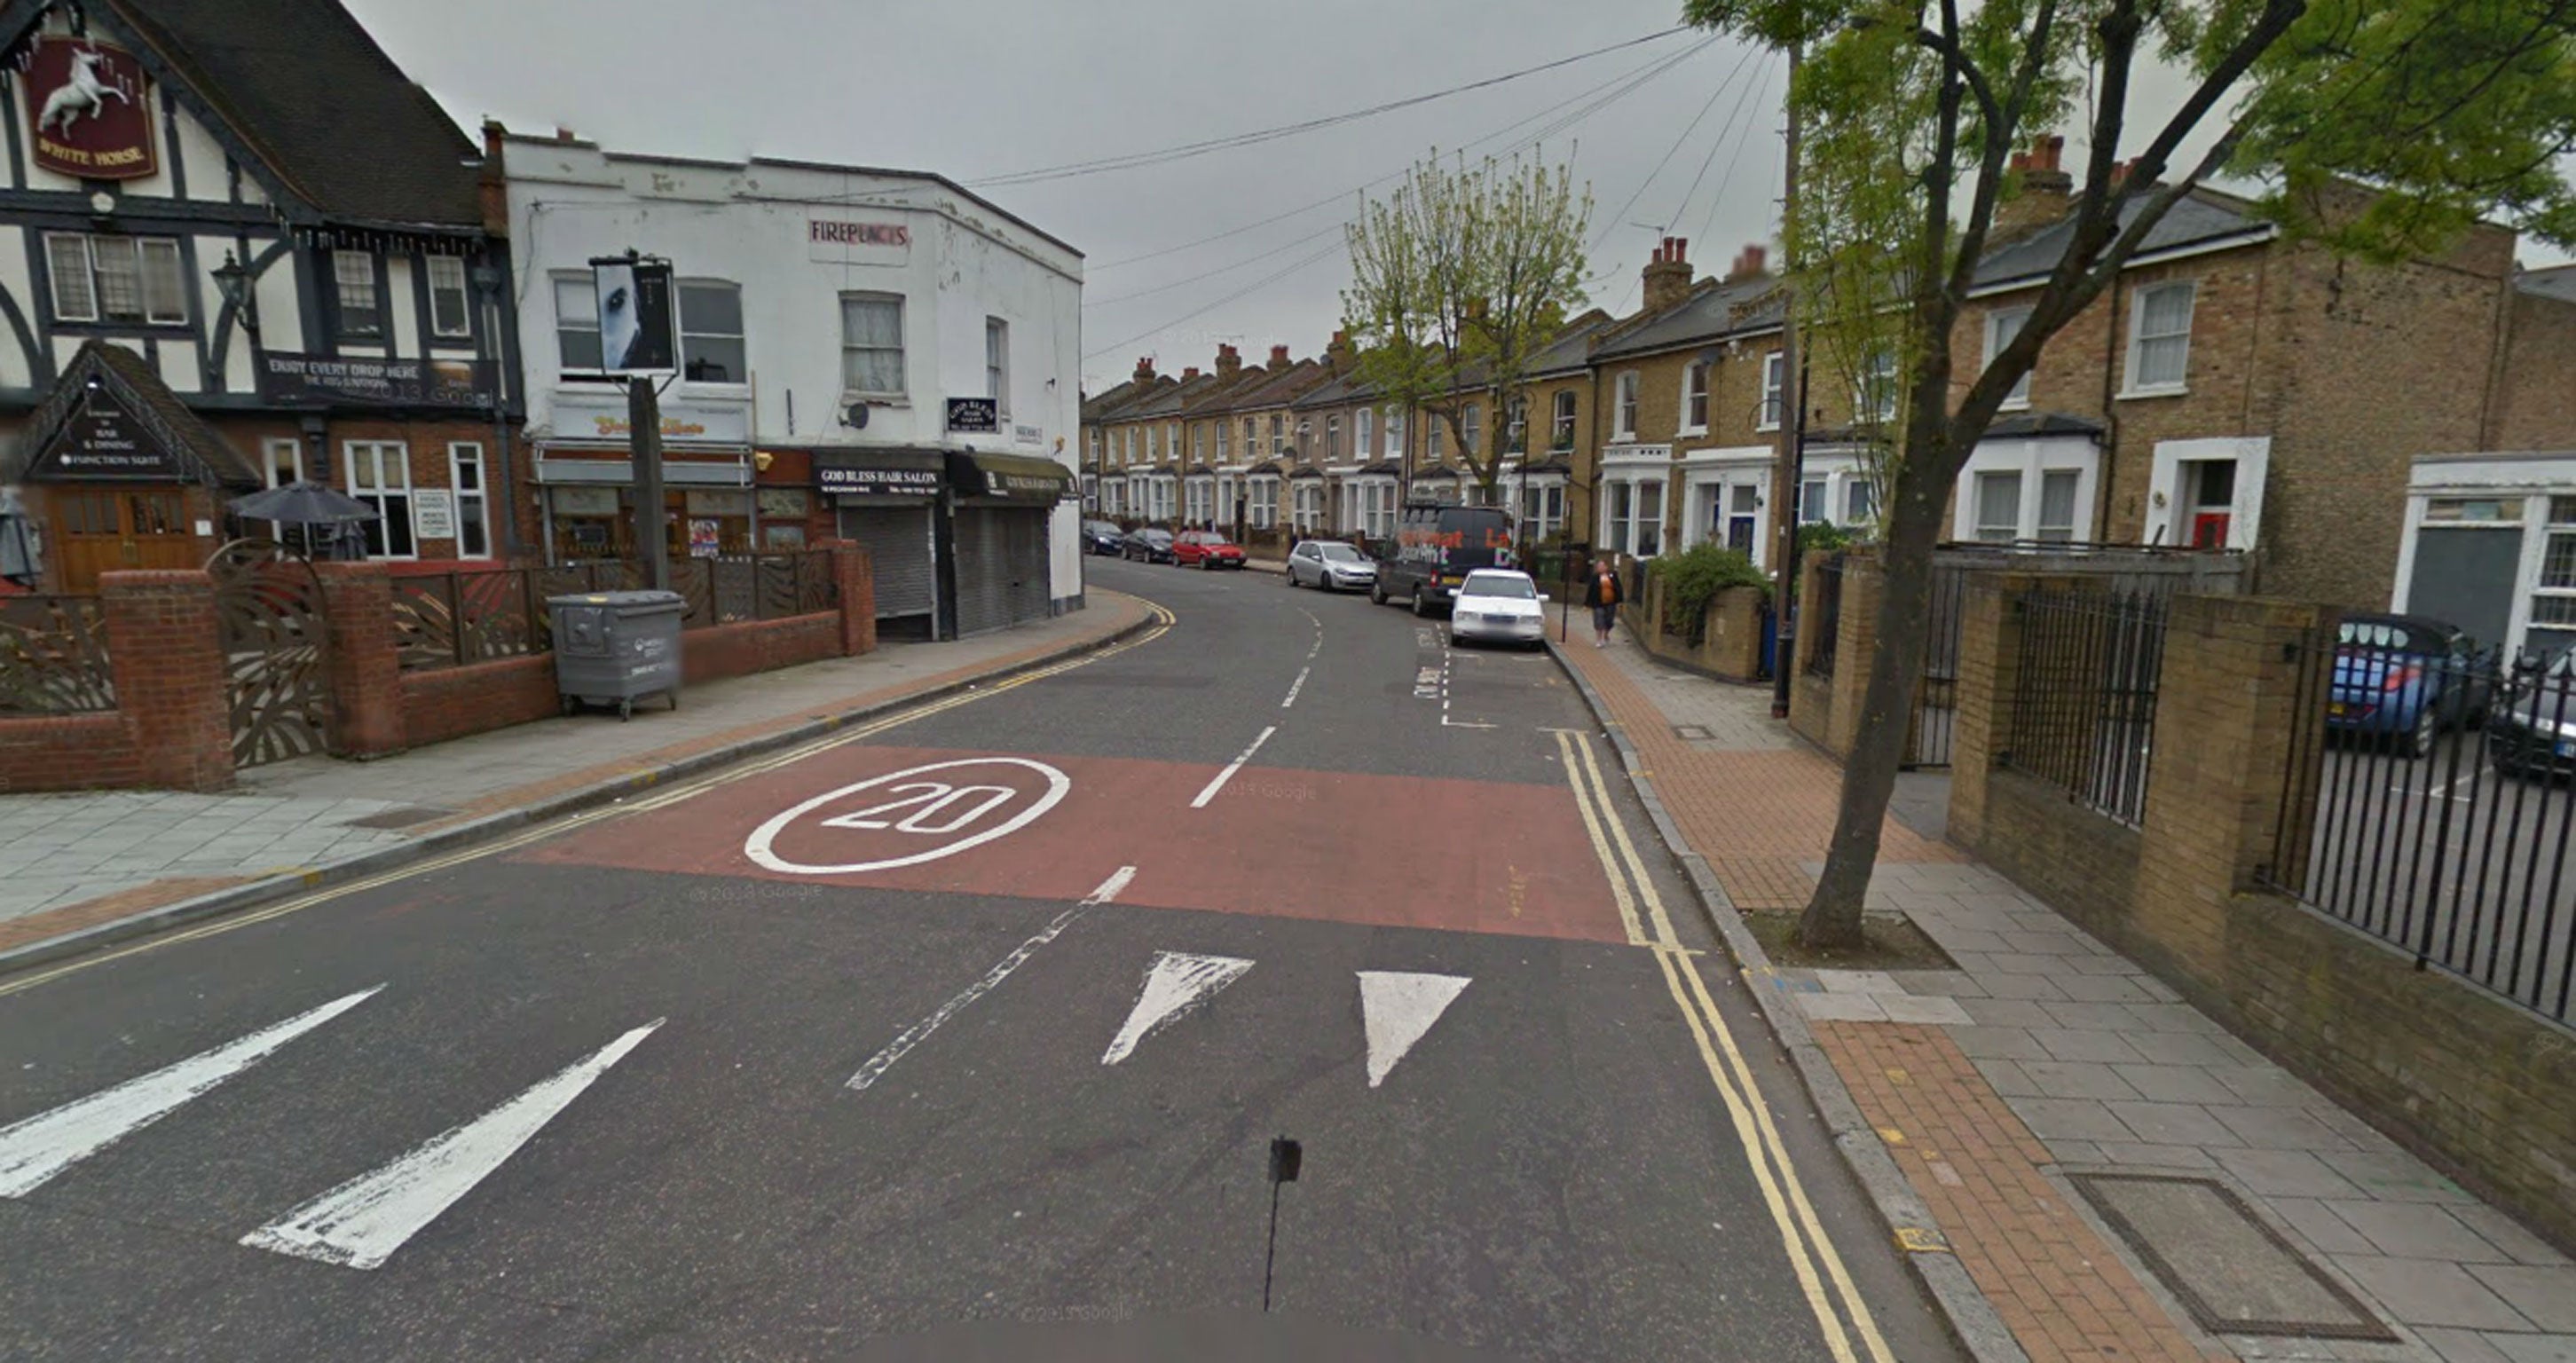 The unnamed 28-year-old man fell off his bike on Nigel Road, Peckham at around 2.15am on Tuesday.